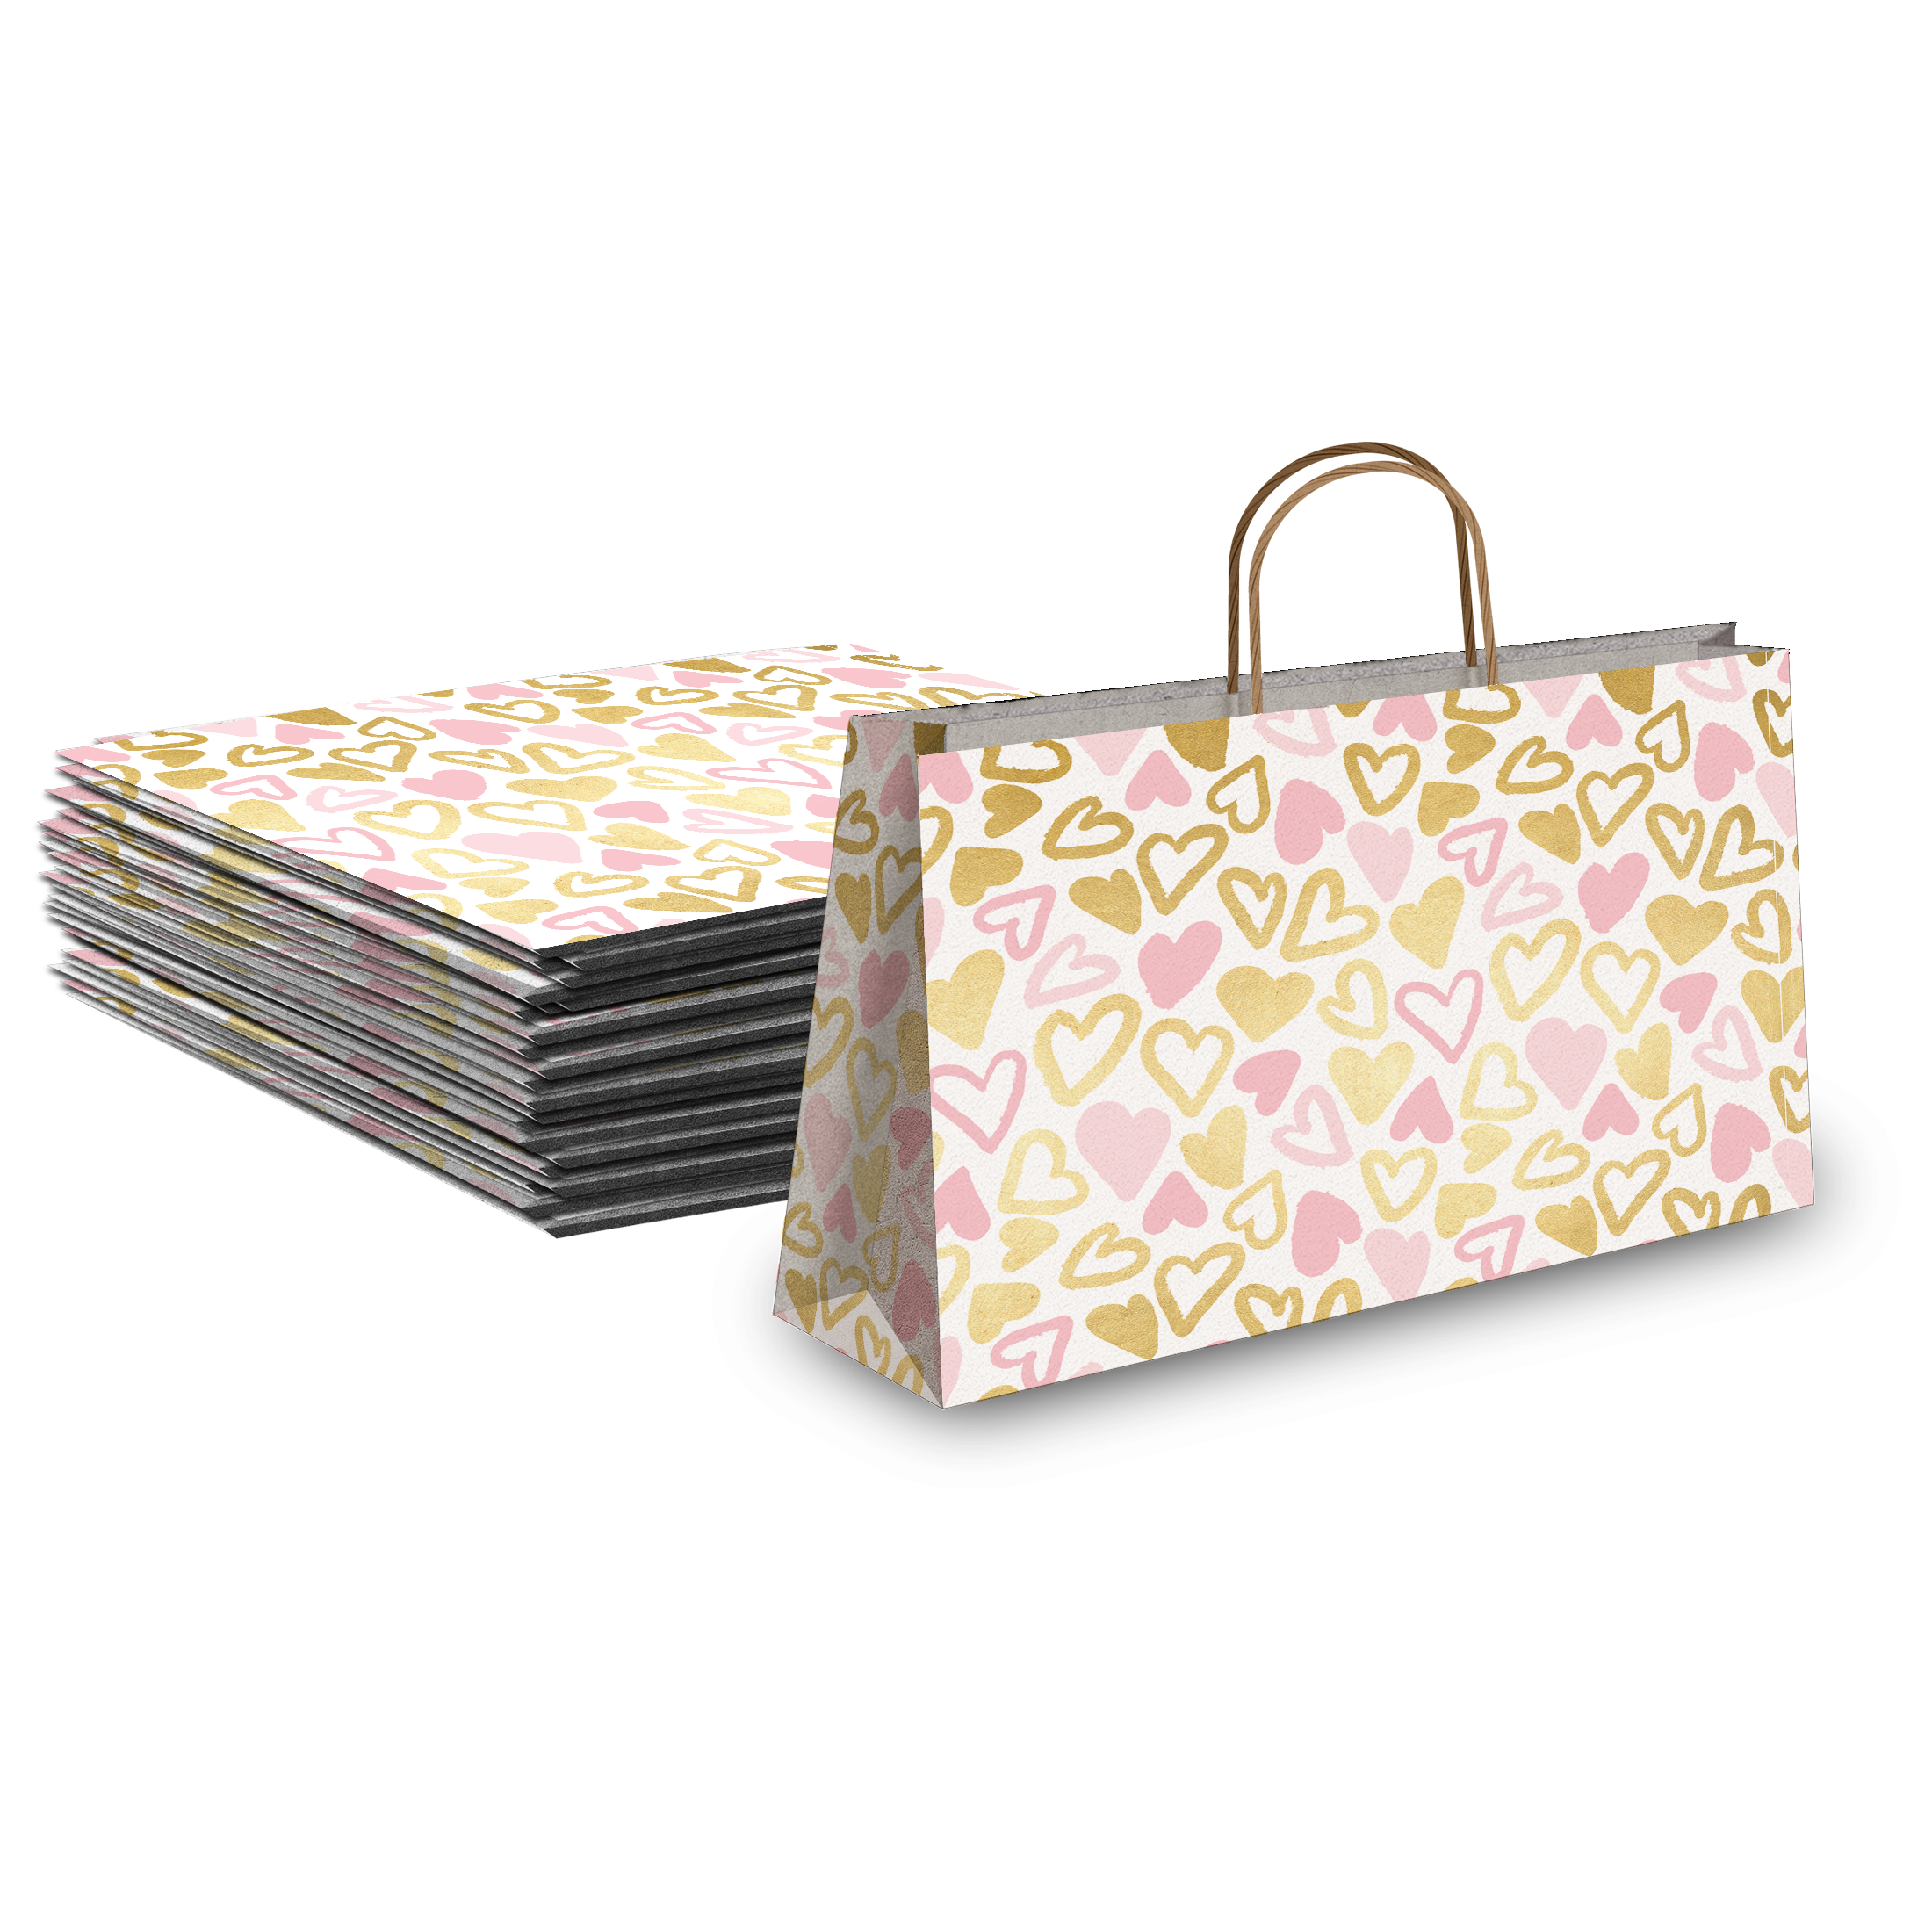 Pink and Gold Hearts Large Birthday Gift Bags Vogue Kraft Shopping Bags with Handles (11.5x16x6 inches)